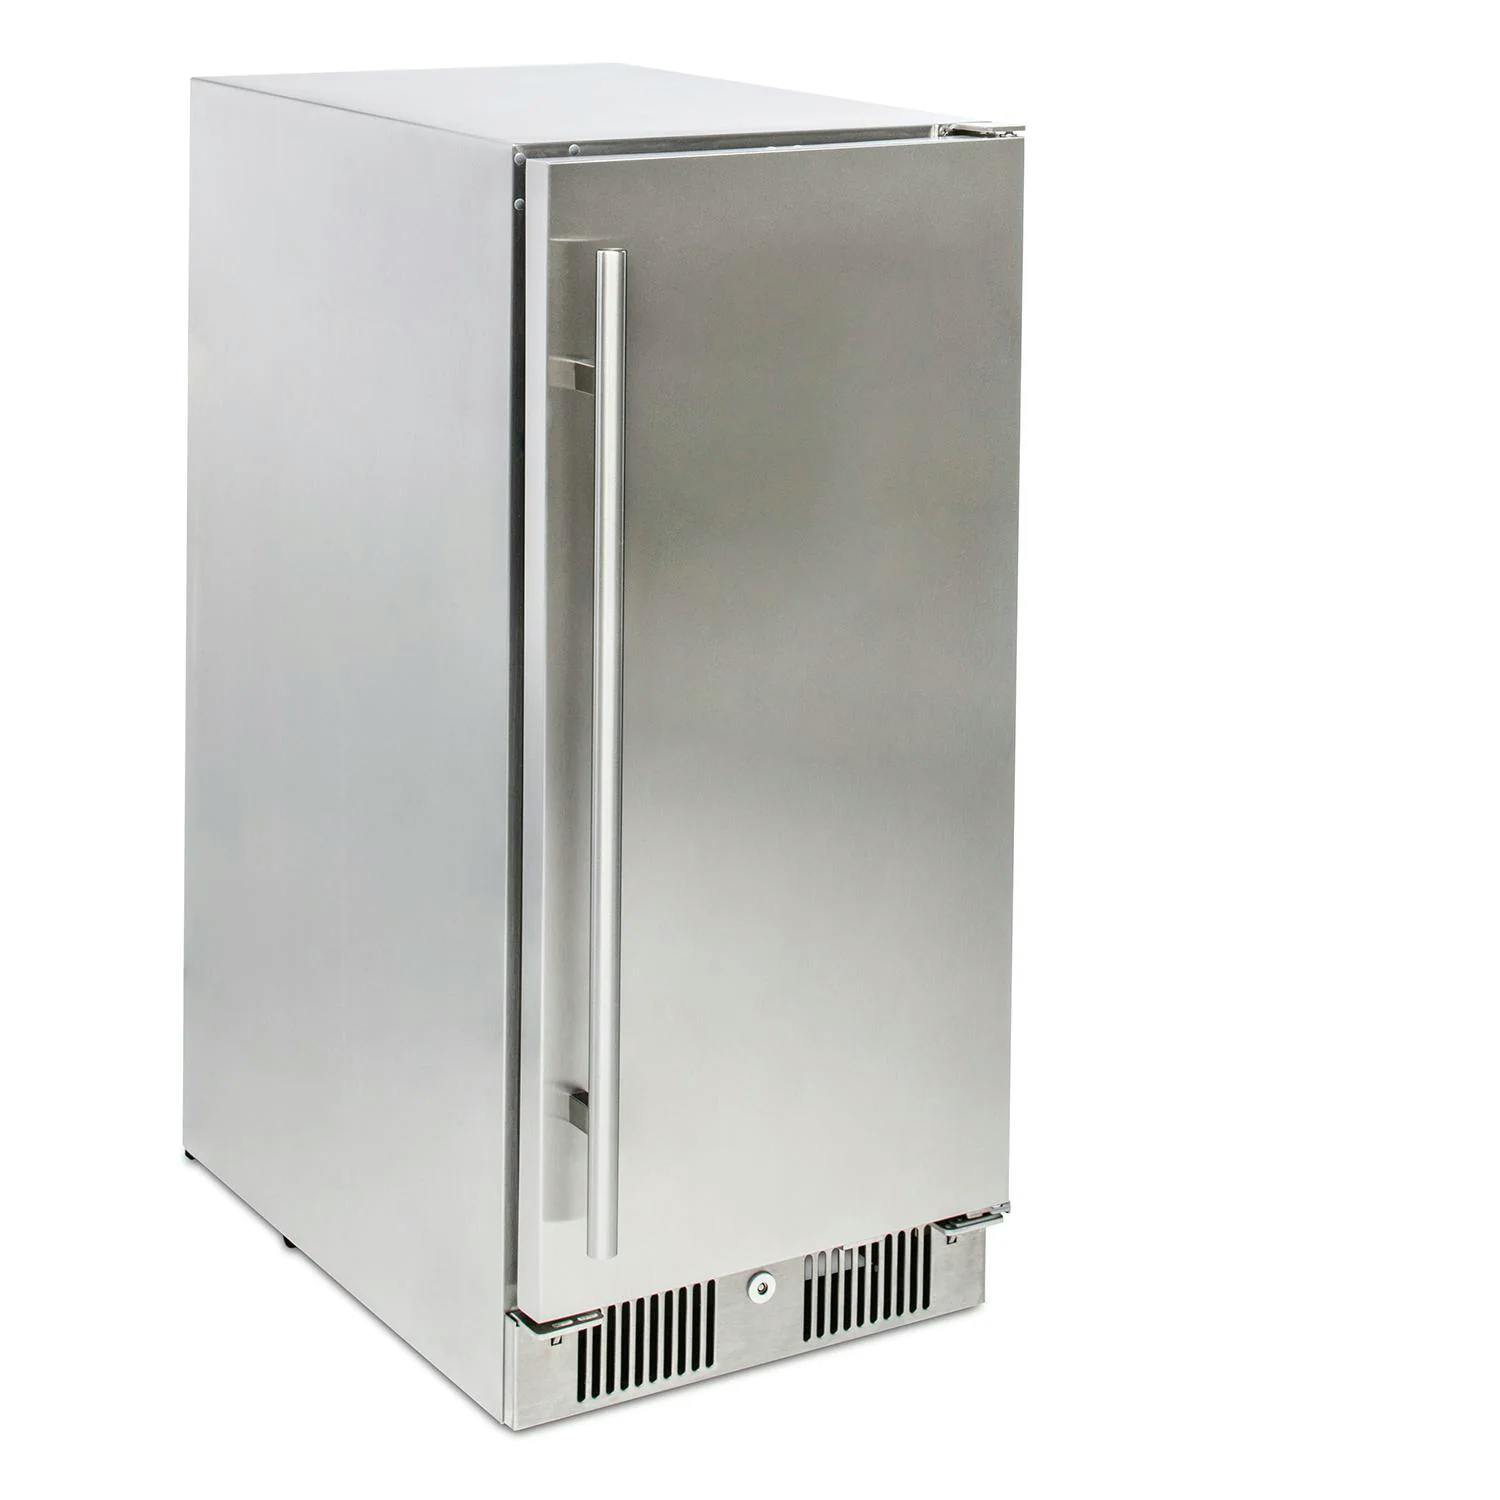 Blaze Outdoor Rated Compact Refrigerator